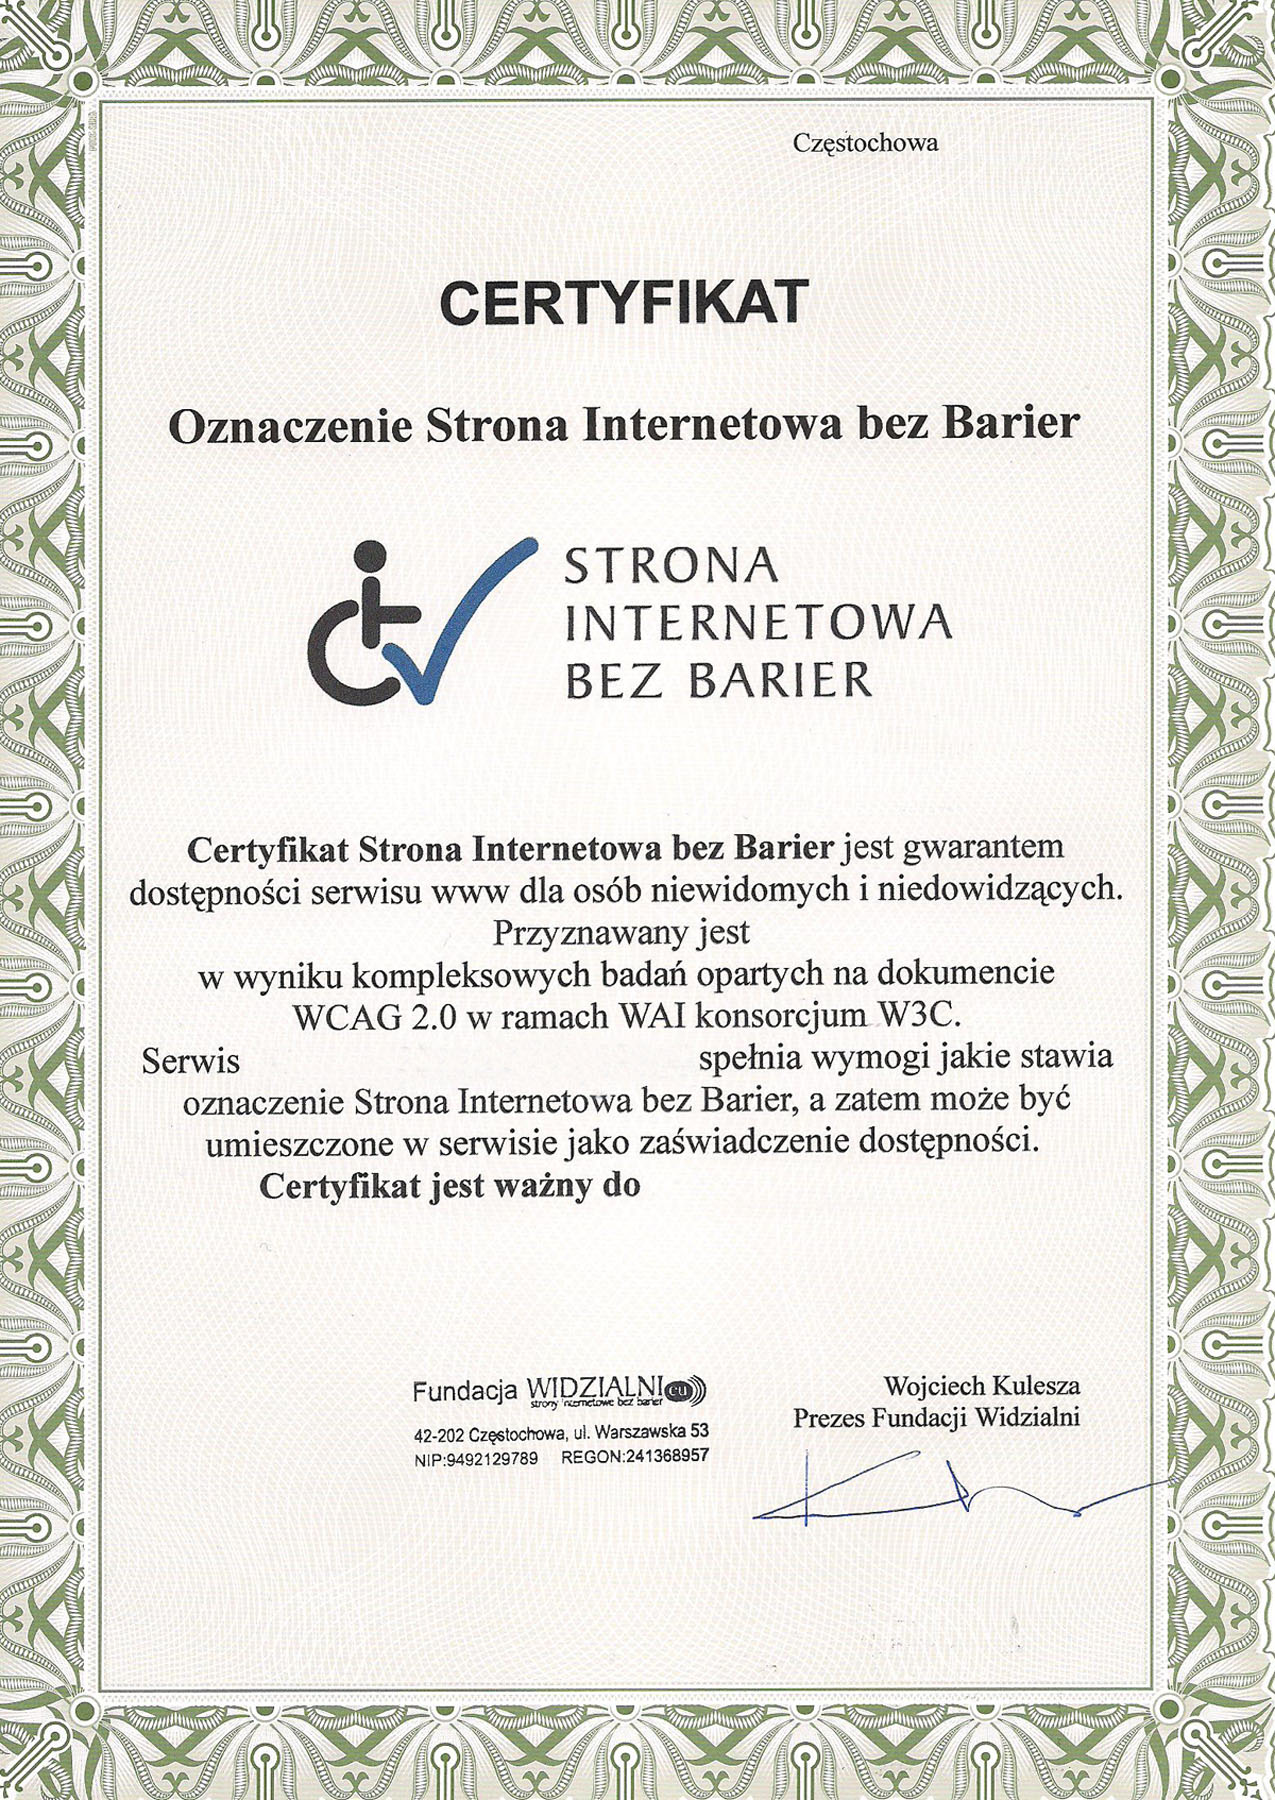 Example of the certificate Web site without barriers